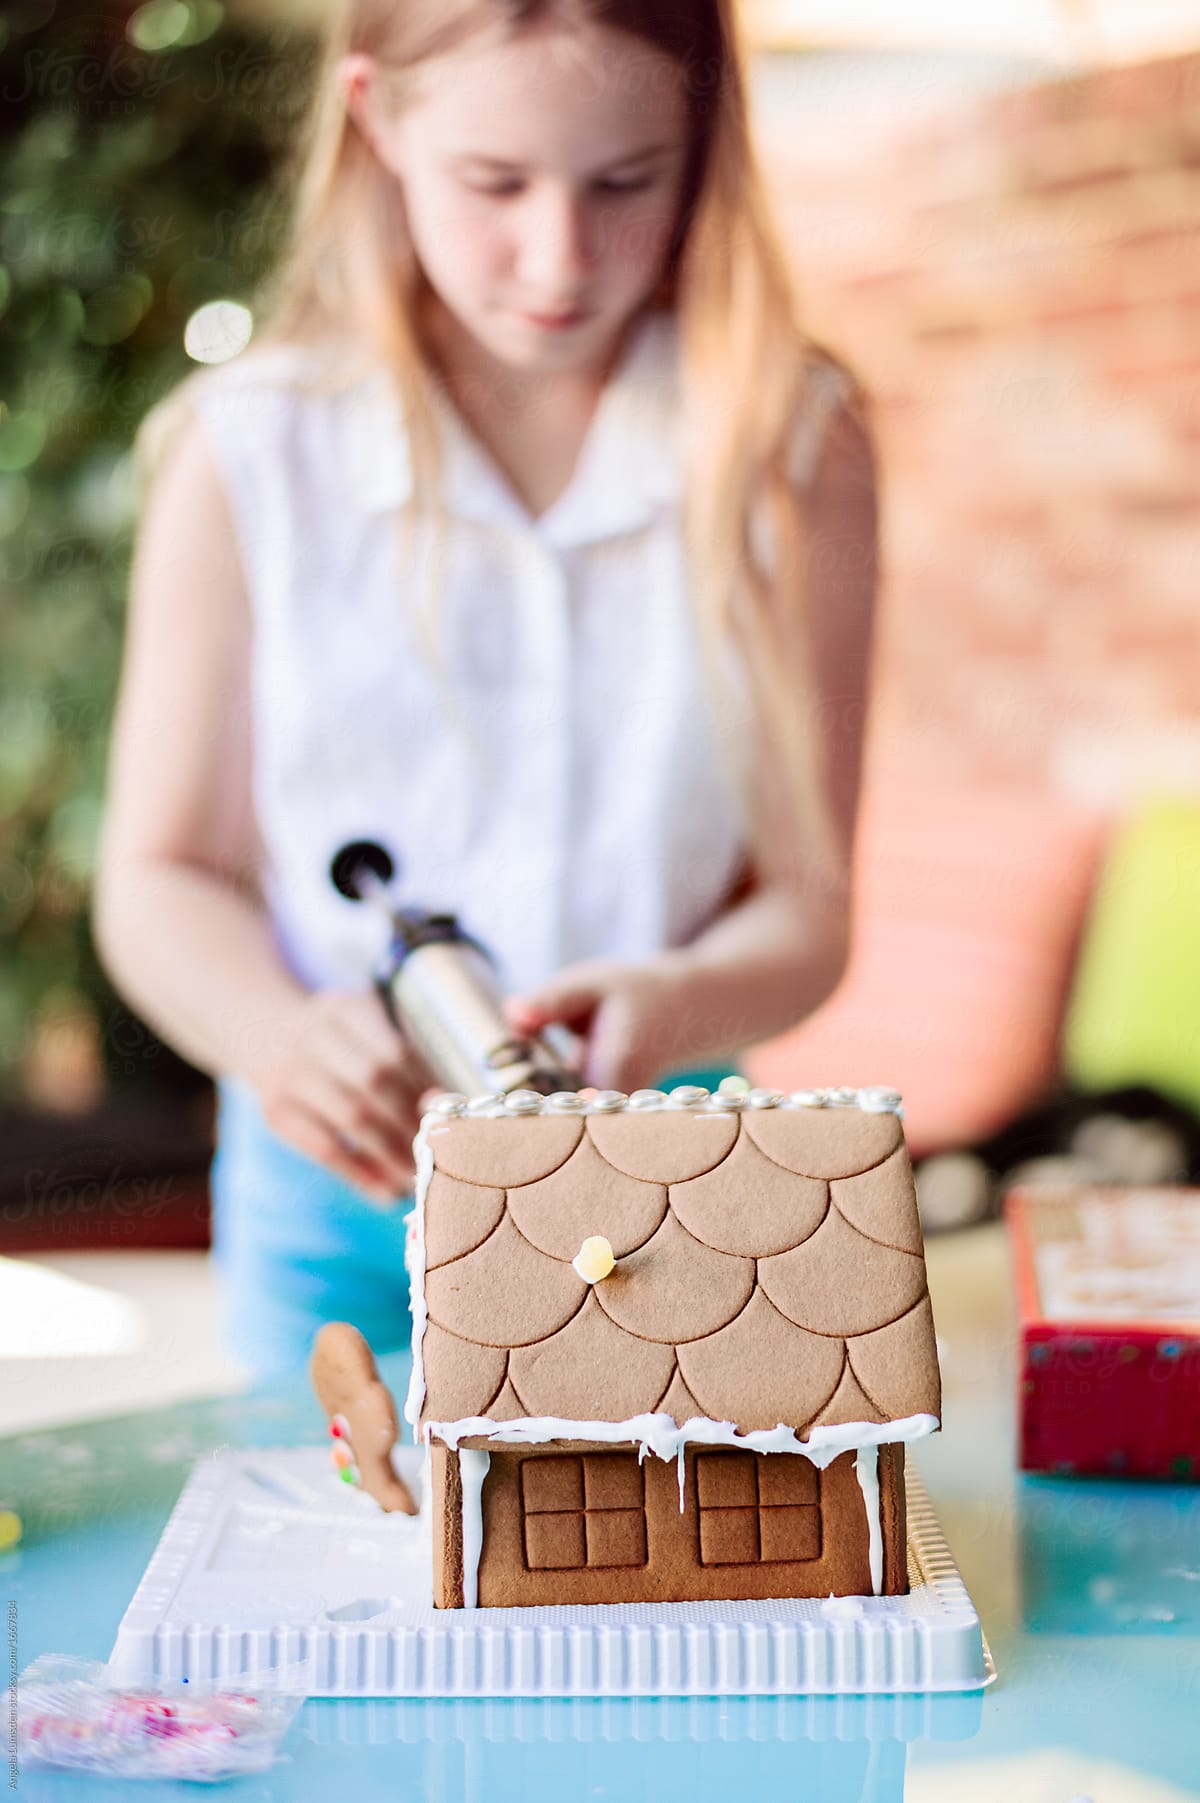 Girl decorating a gingerbread house at christmas